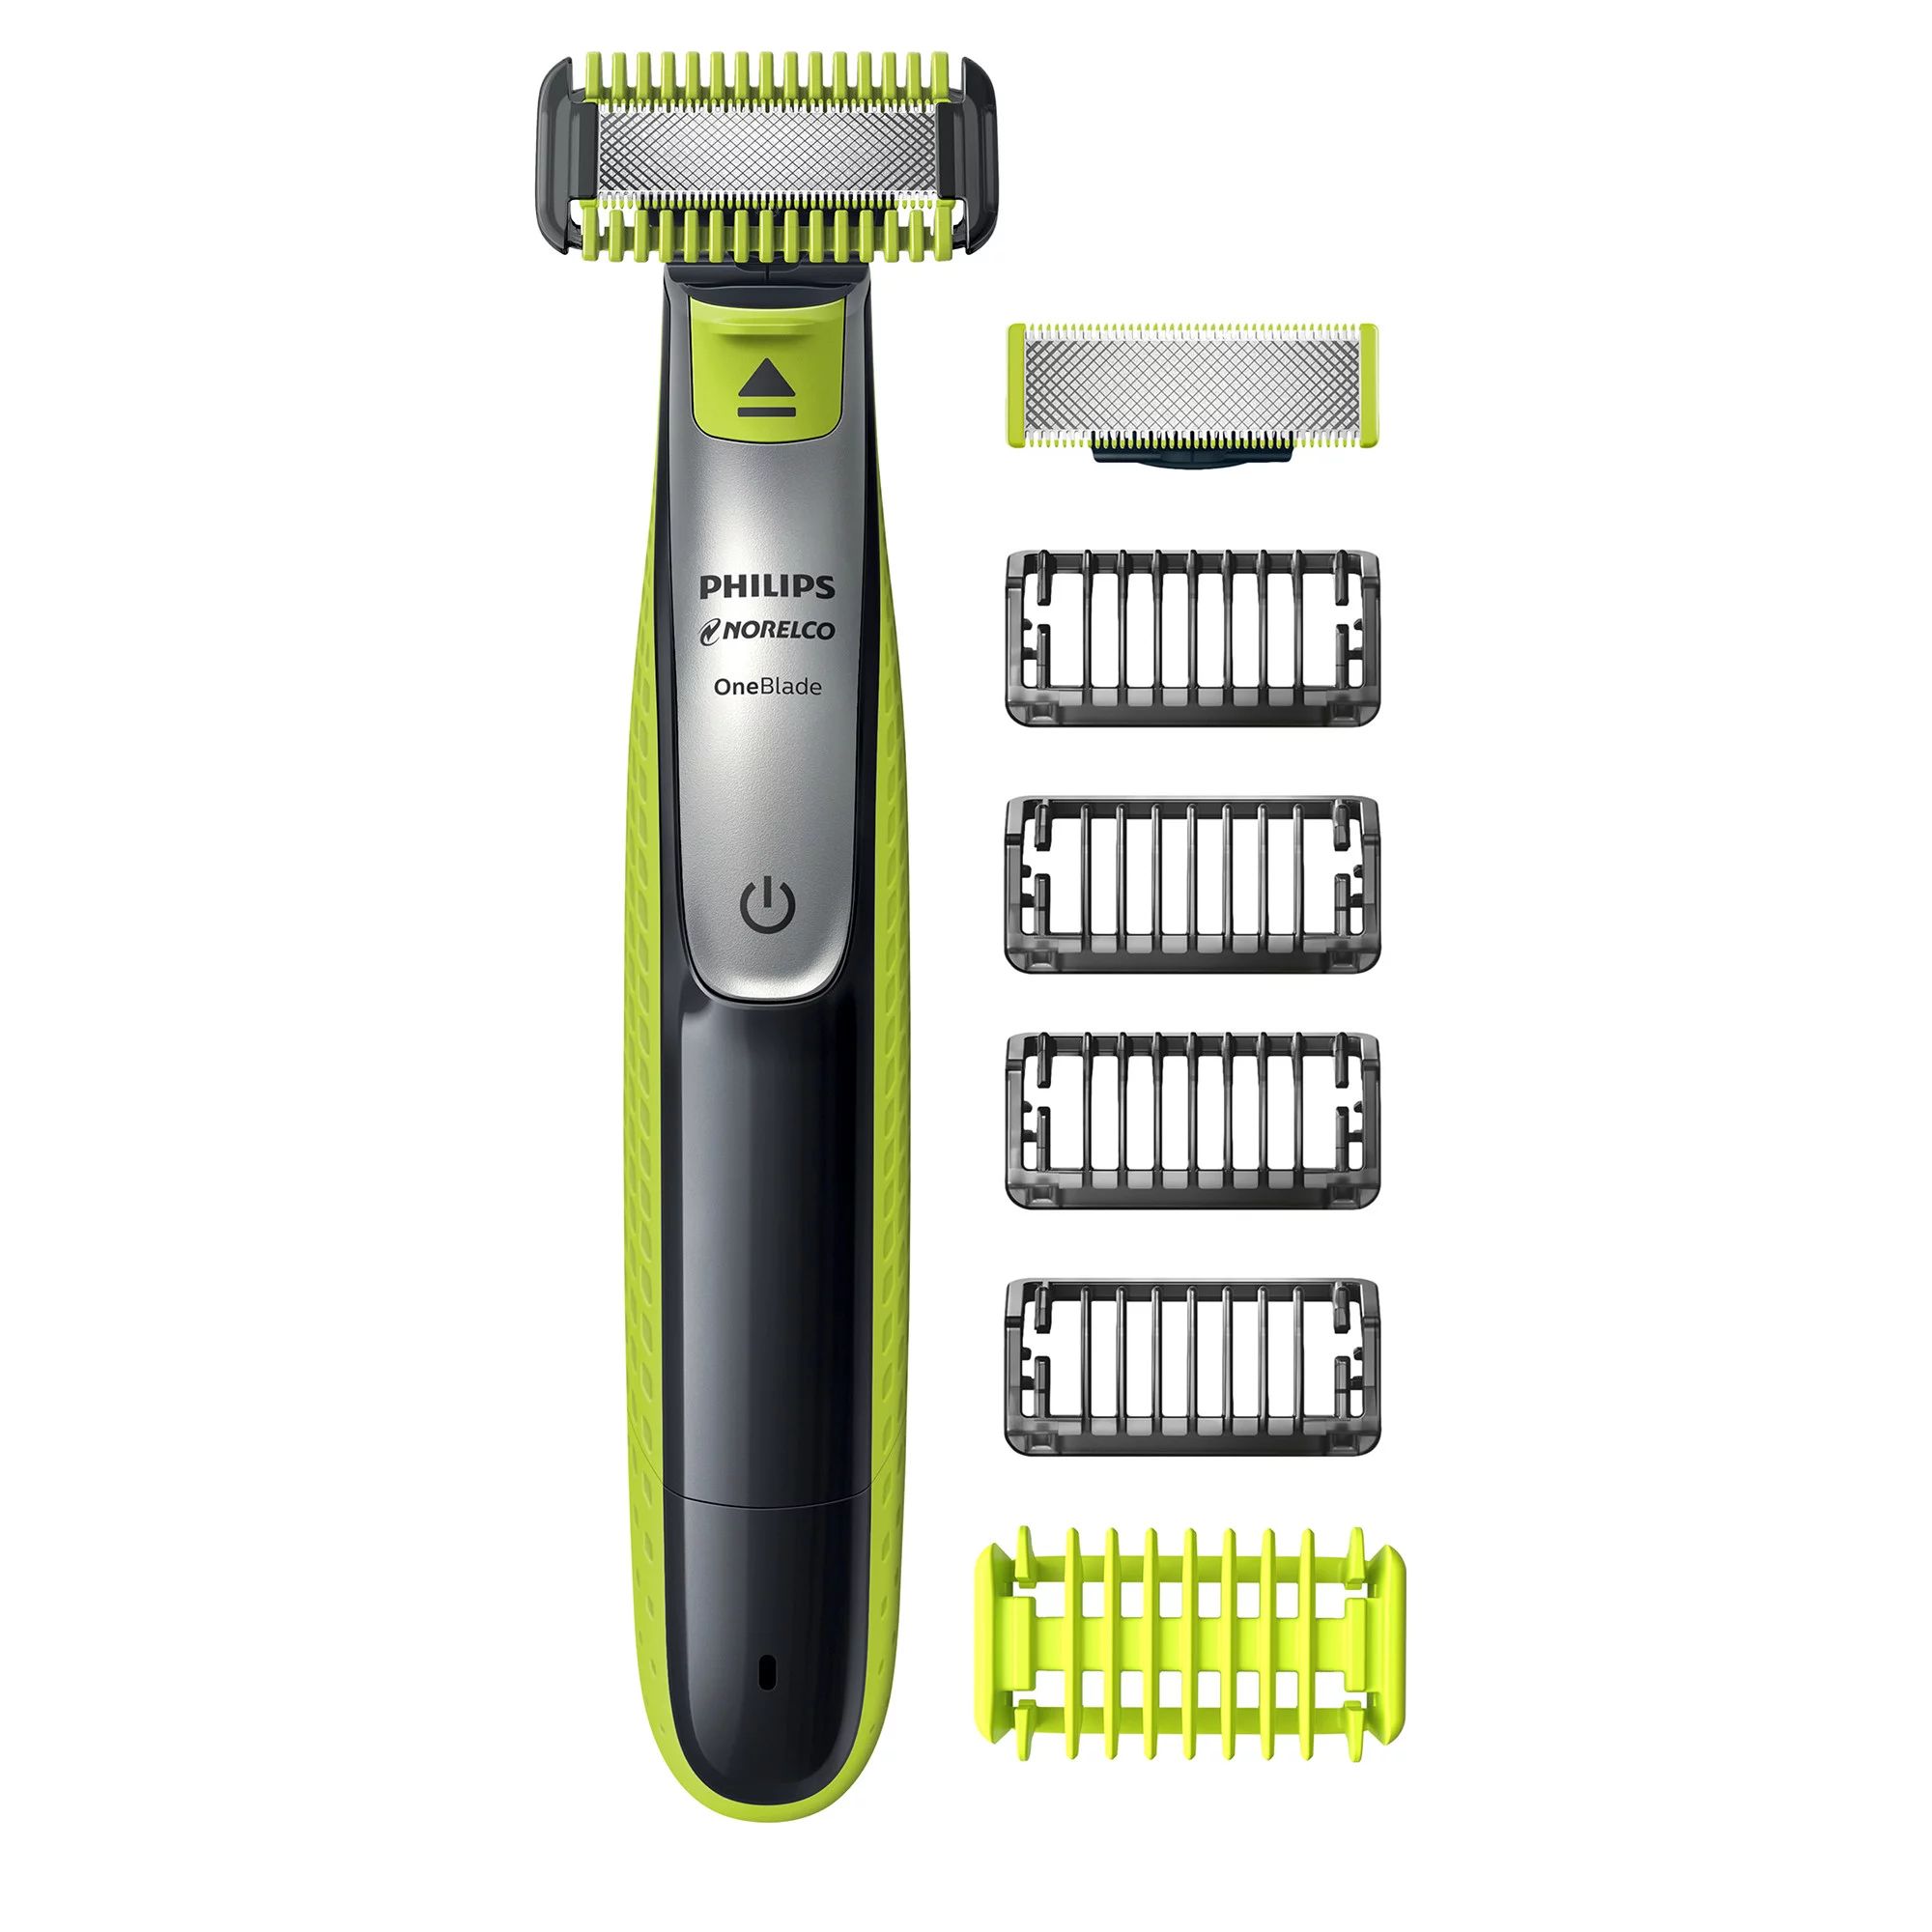 Philips Norelco Oneblade Face + Body  Hybrid Electric Trimmer and Shaver, QP2630/70 | Walmart (US)